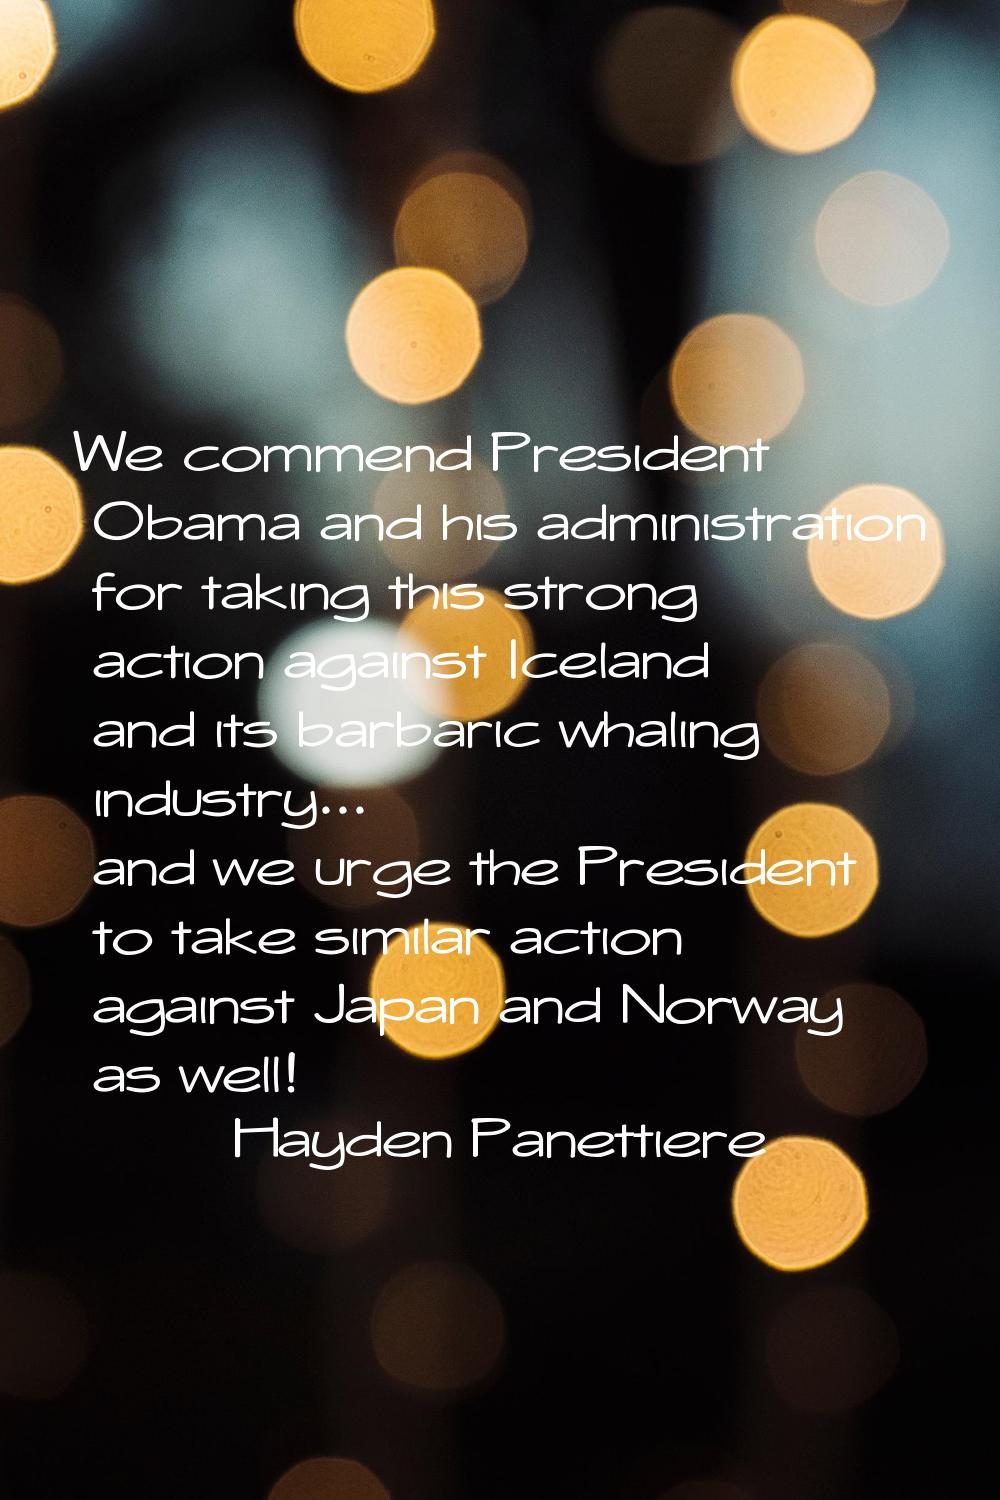 We commend President Obama and his administration for taking this strong action against Iceland and